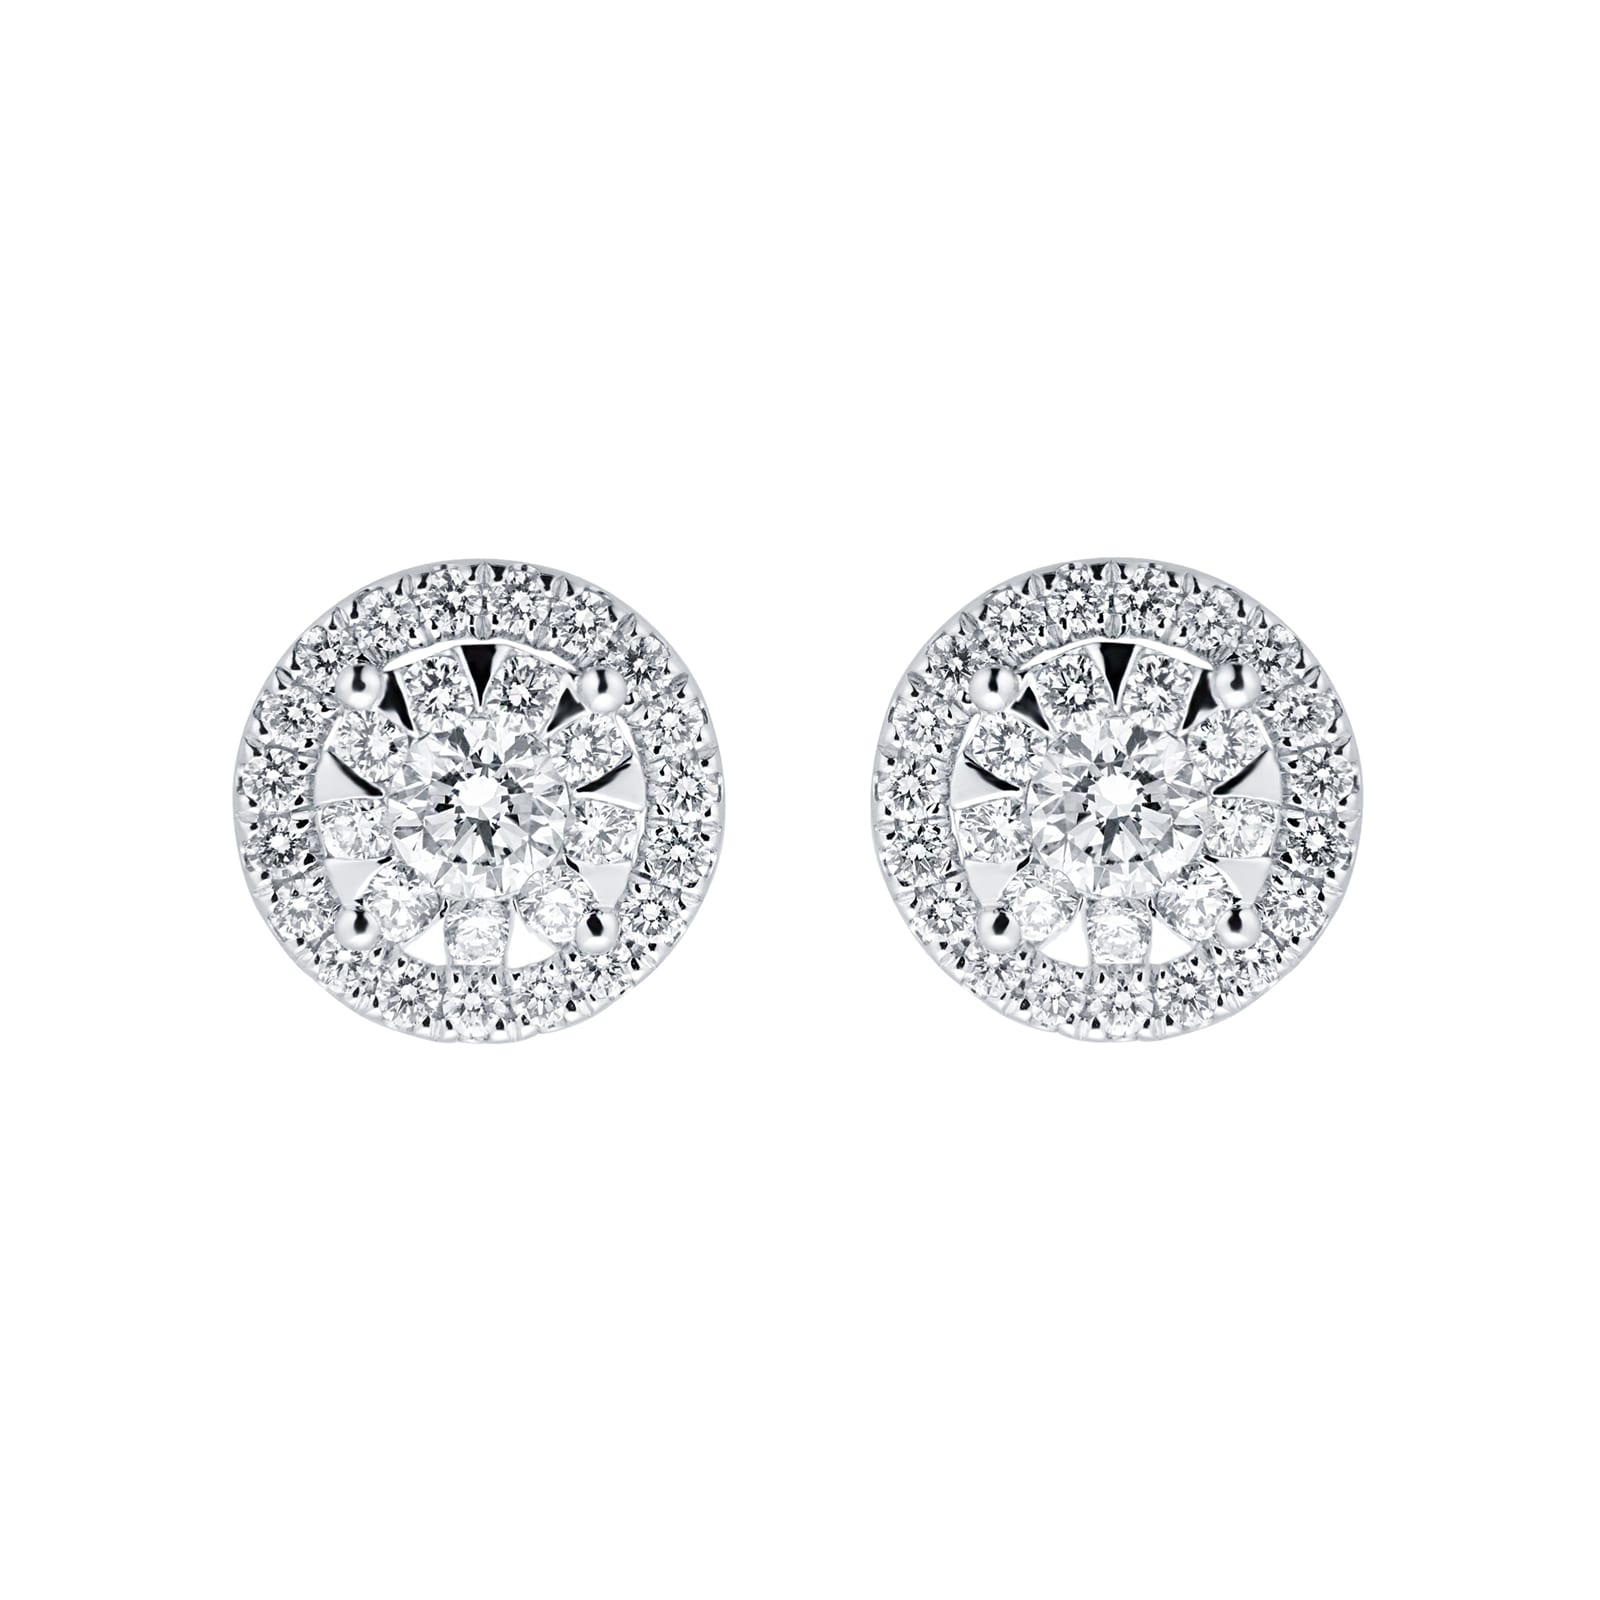 Mappin & Webb Masquerade 18ct White Gold 1.00cttw Diamond Stud Earrings ...